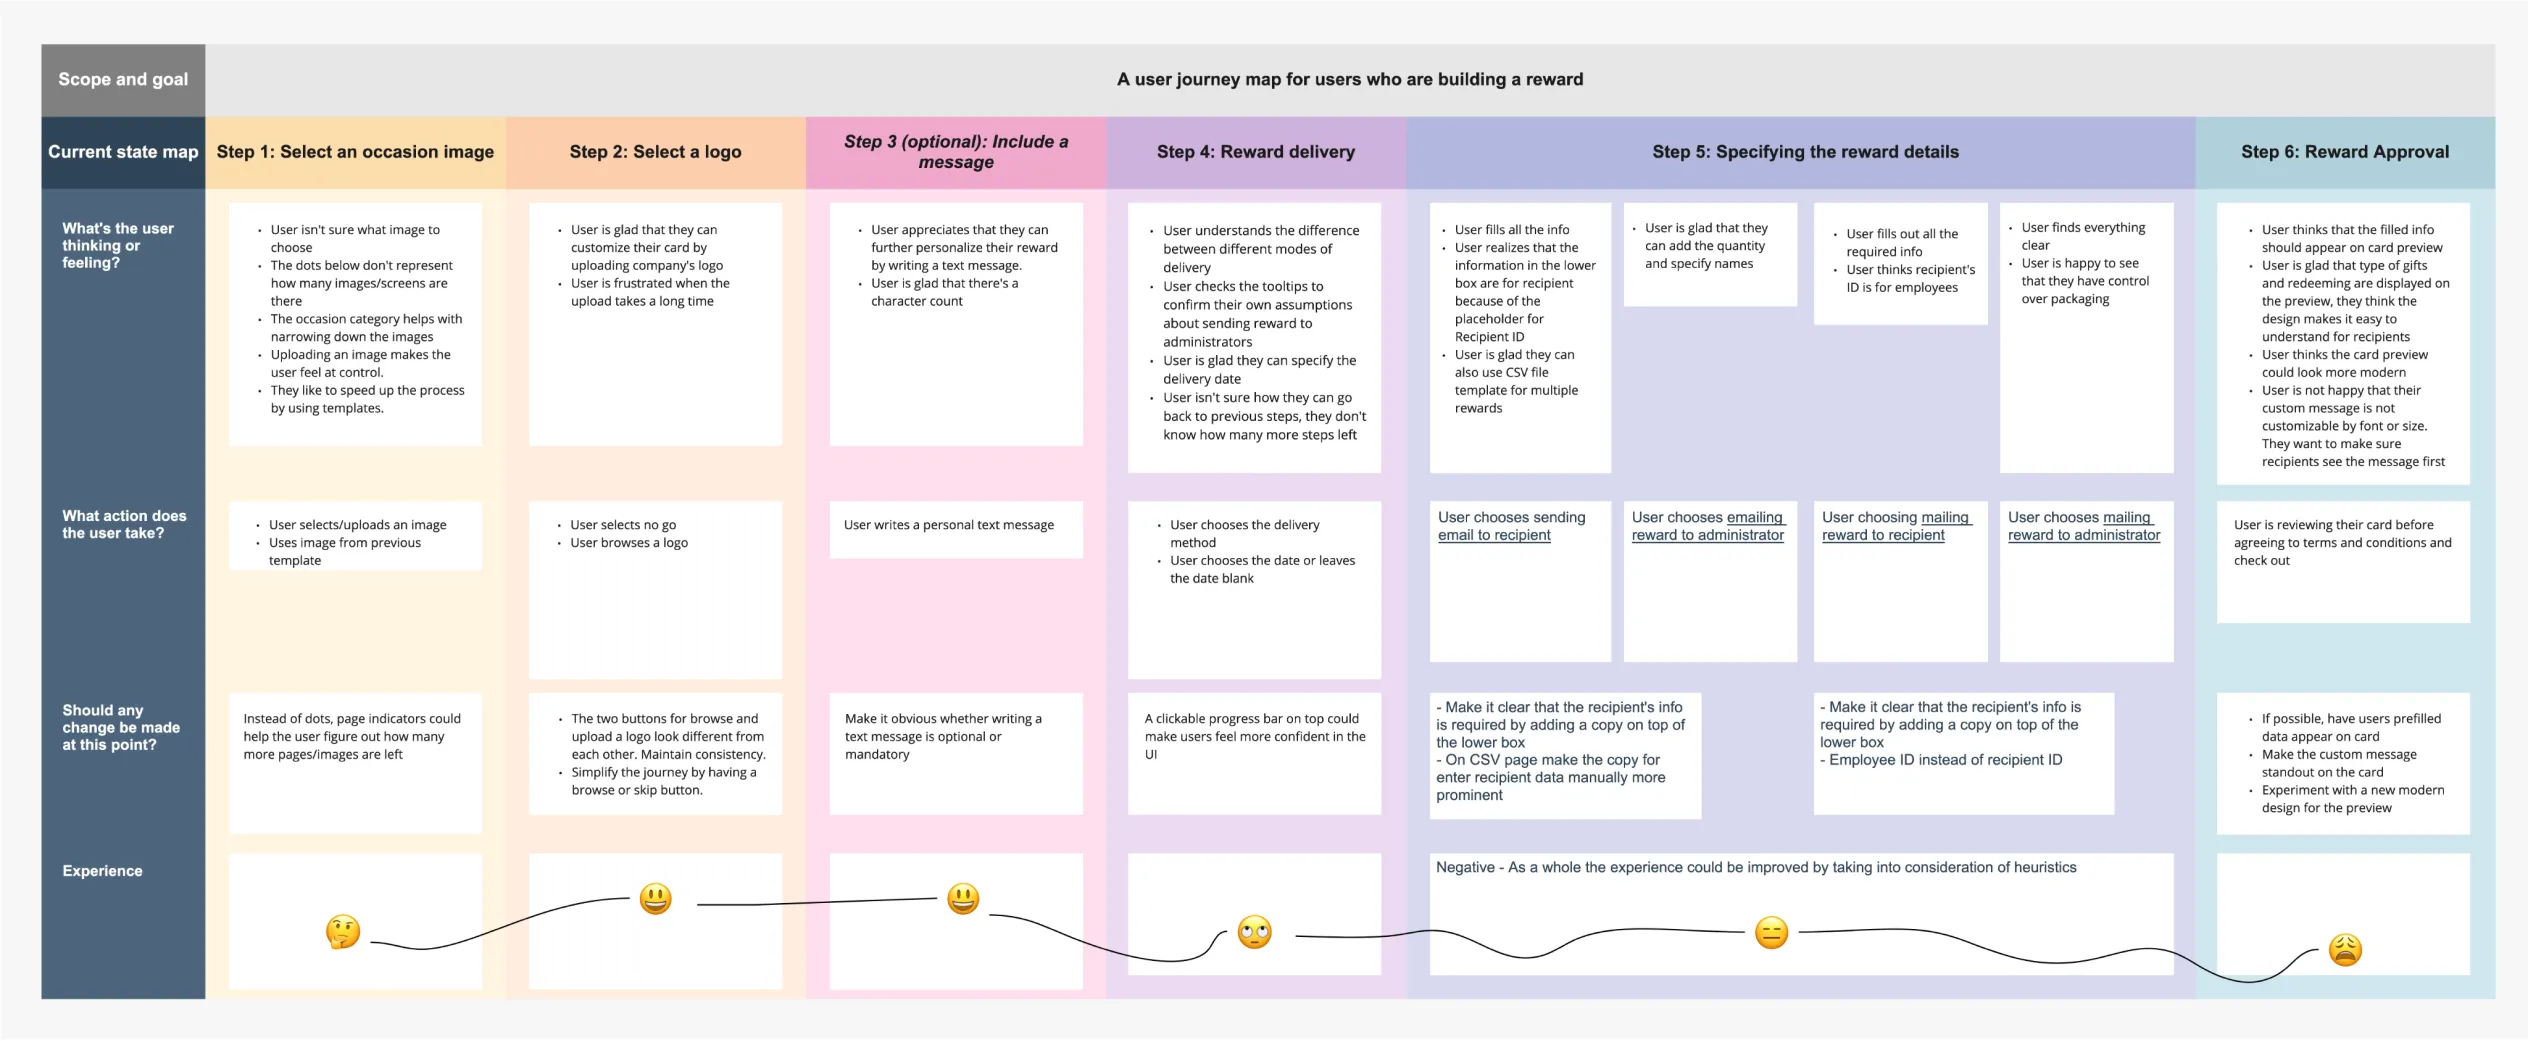 A user journey map for users who are building a reward using the platform.